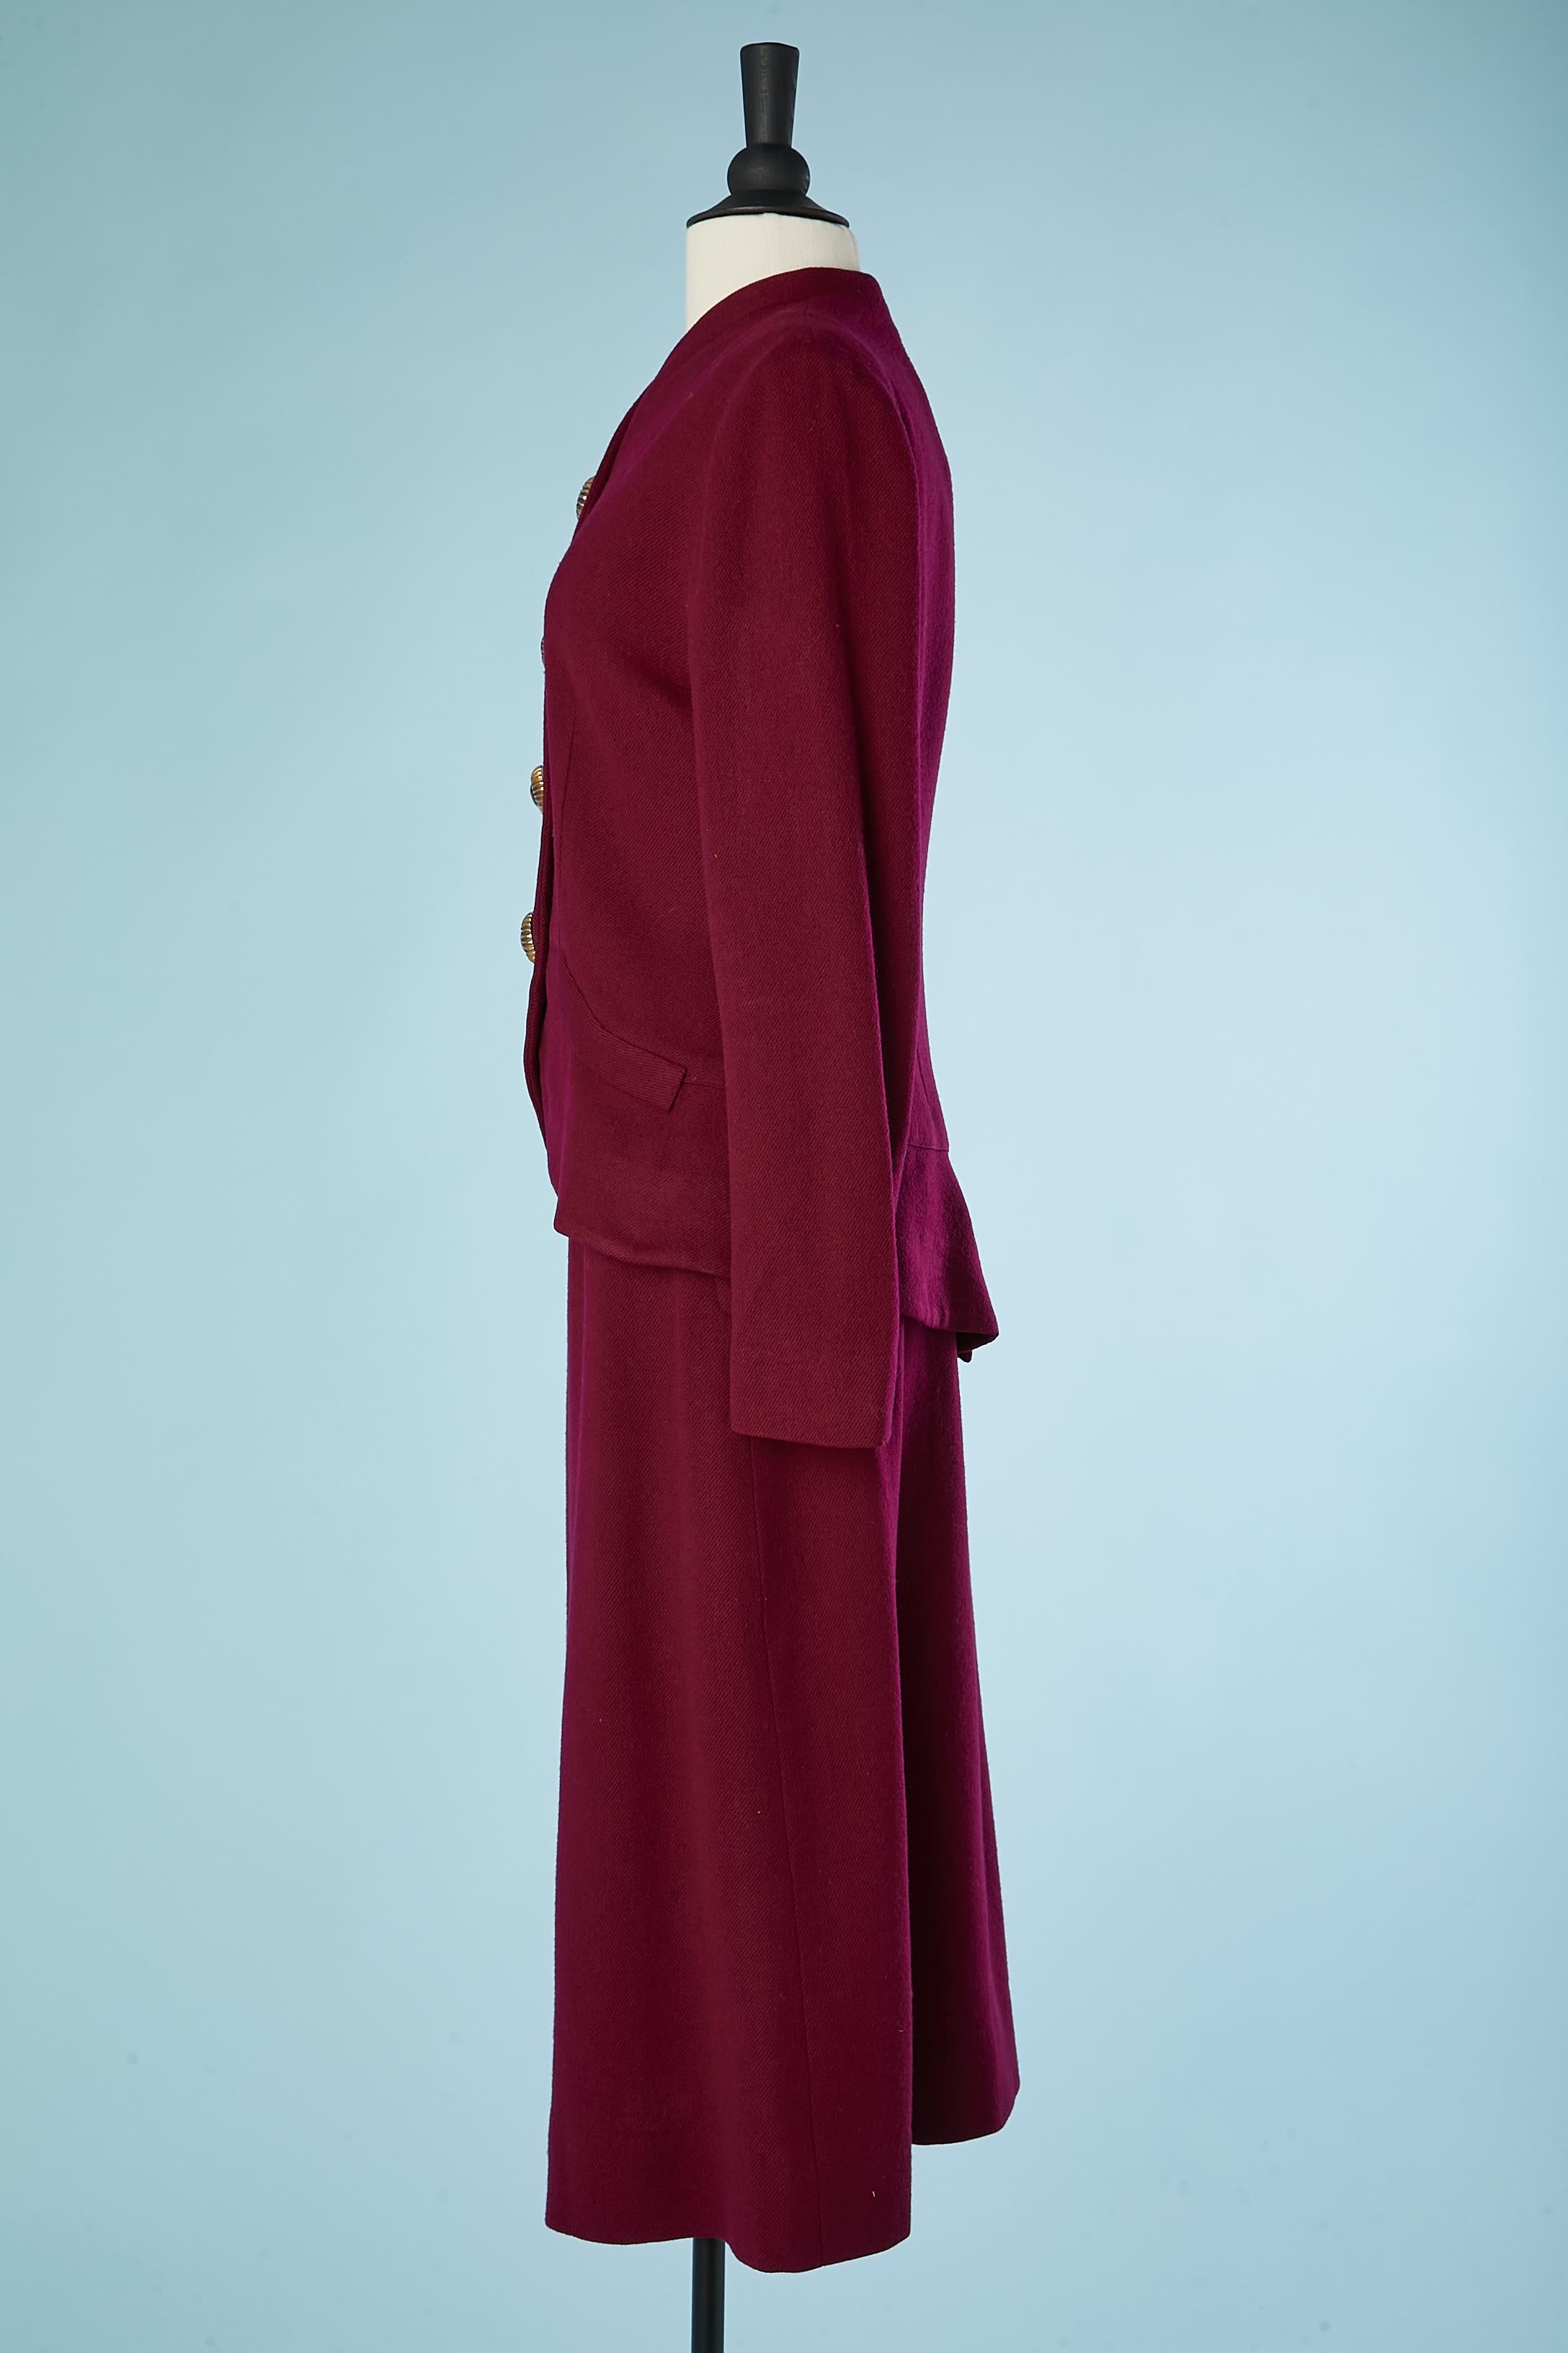 Burgundy skirt-suit in wool with jewellery buttons Circa 1940/50 In Excellent Condition For Sale In Saint-Ouen-Sur-Seine, FR